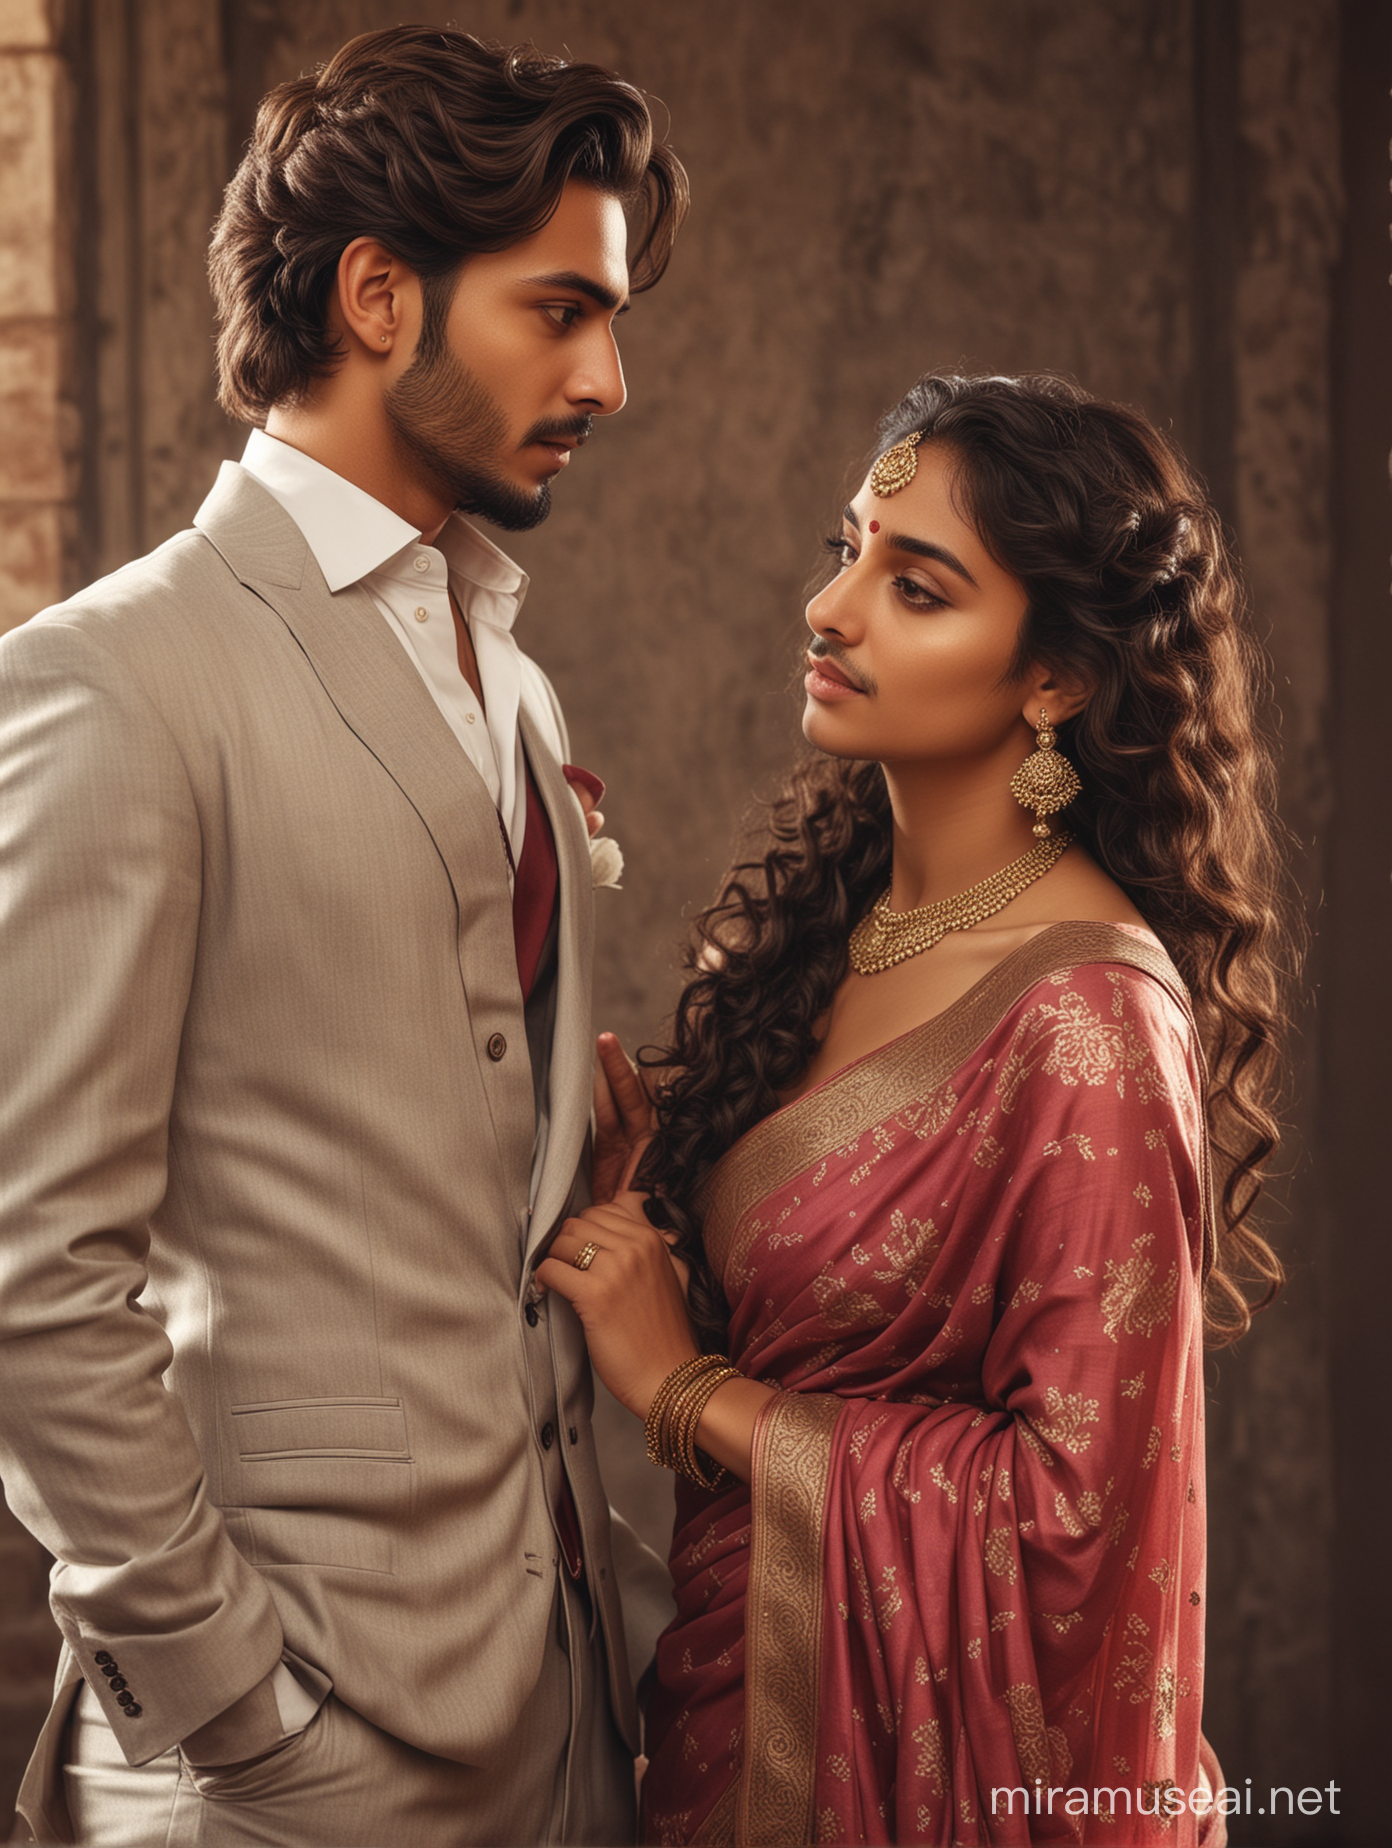 two intimate lovers, full body portrait of most handsome european man with indian features, elegant and arrogant looks, alfa male, fashionable beard,
girl, face off, 18 years old, most beautiful indian girl, elegant saree look, low cut back, long curly hair, shy and modest  , photo realistic, 4k.